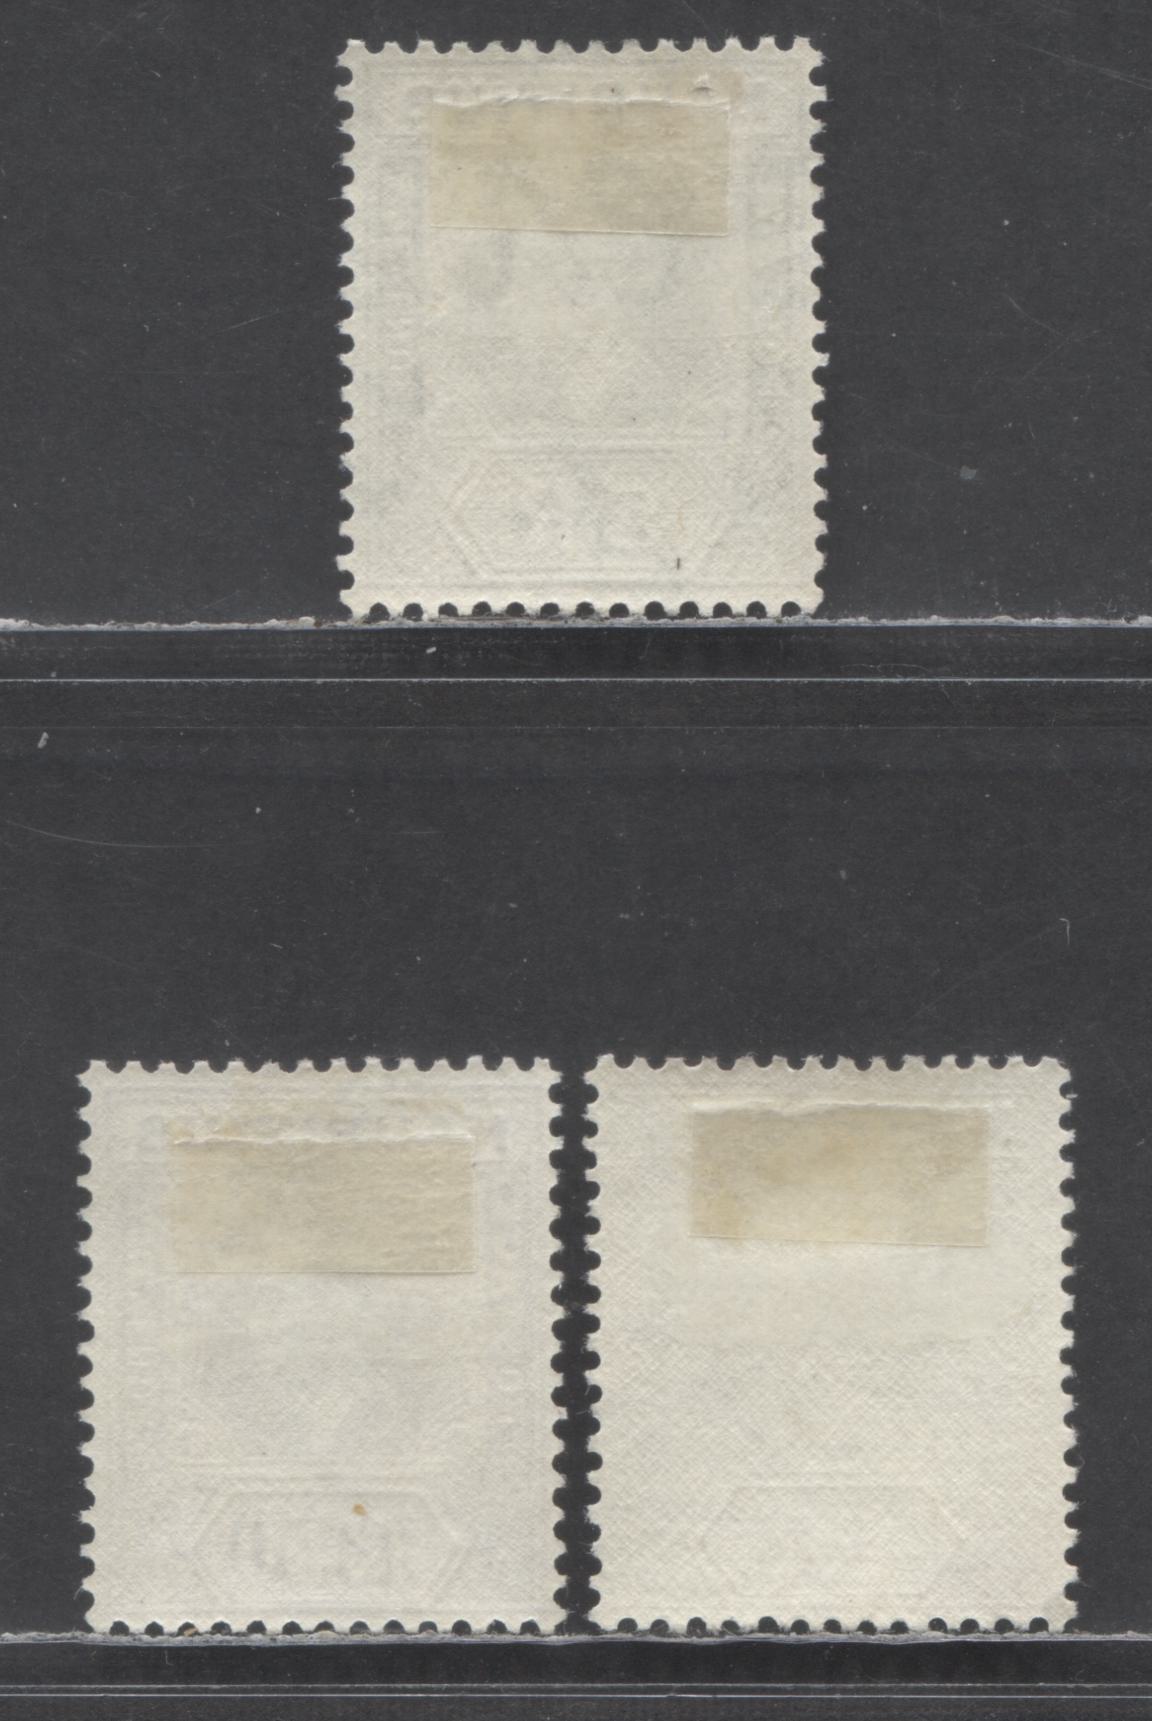 Lot 89 Mauritius SC#219-221a 1938-1943 King George VI Imperium Keyplates, 3 VFOG Singles, Click on Listing to See ALL Pictures, 2022 Scott Classic Cat. $56.5